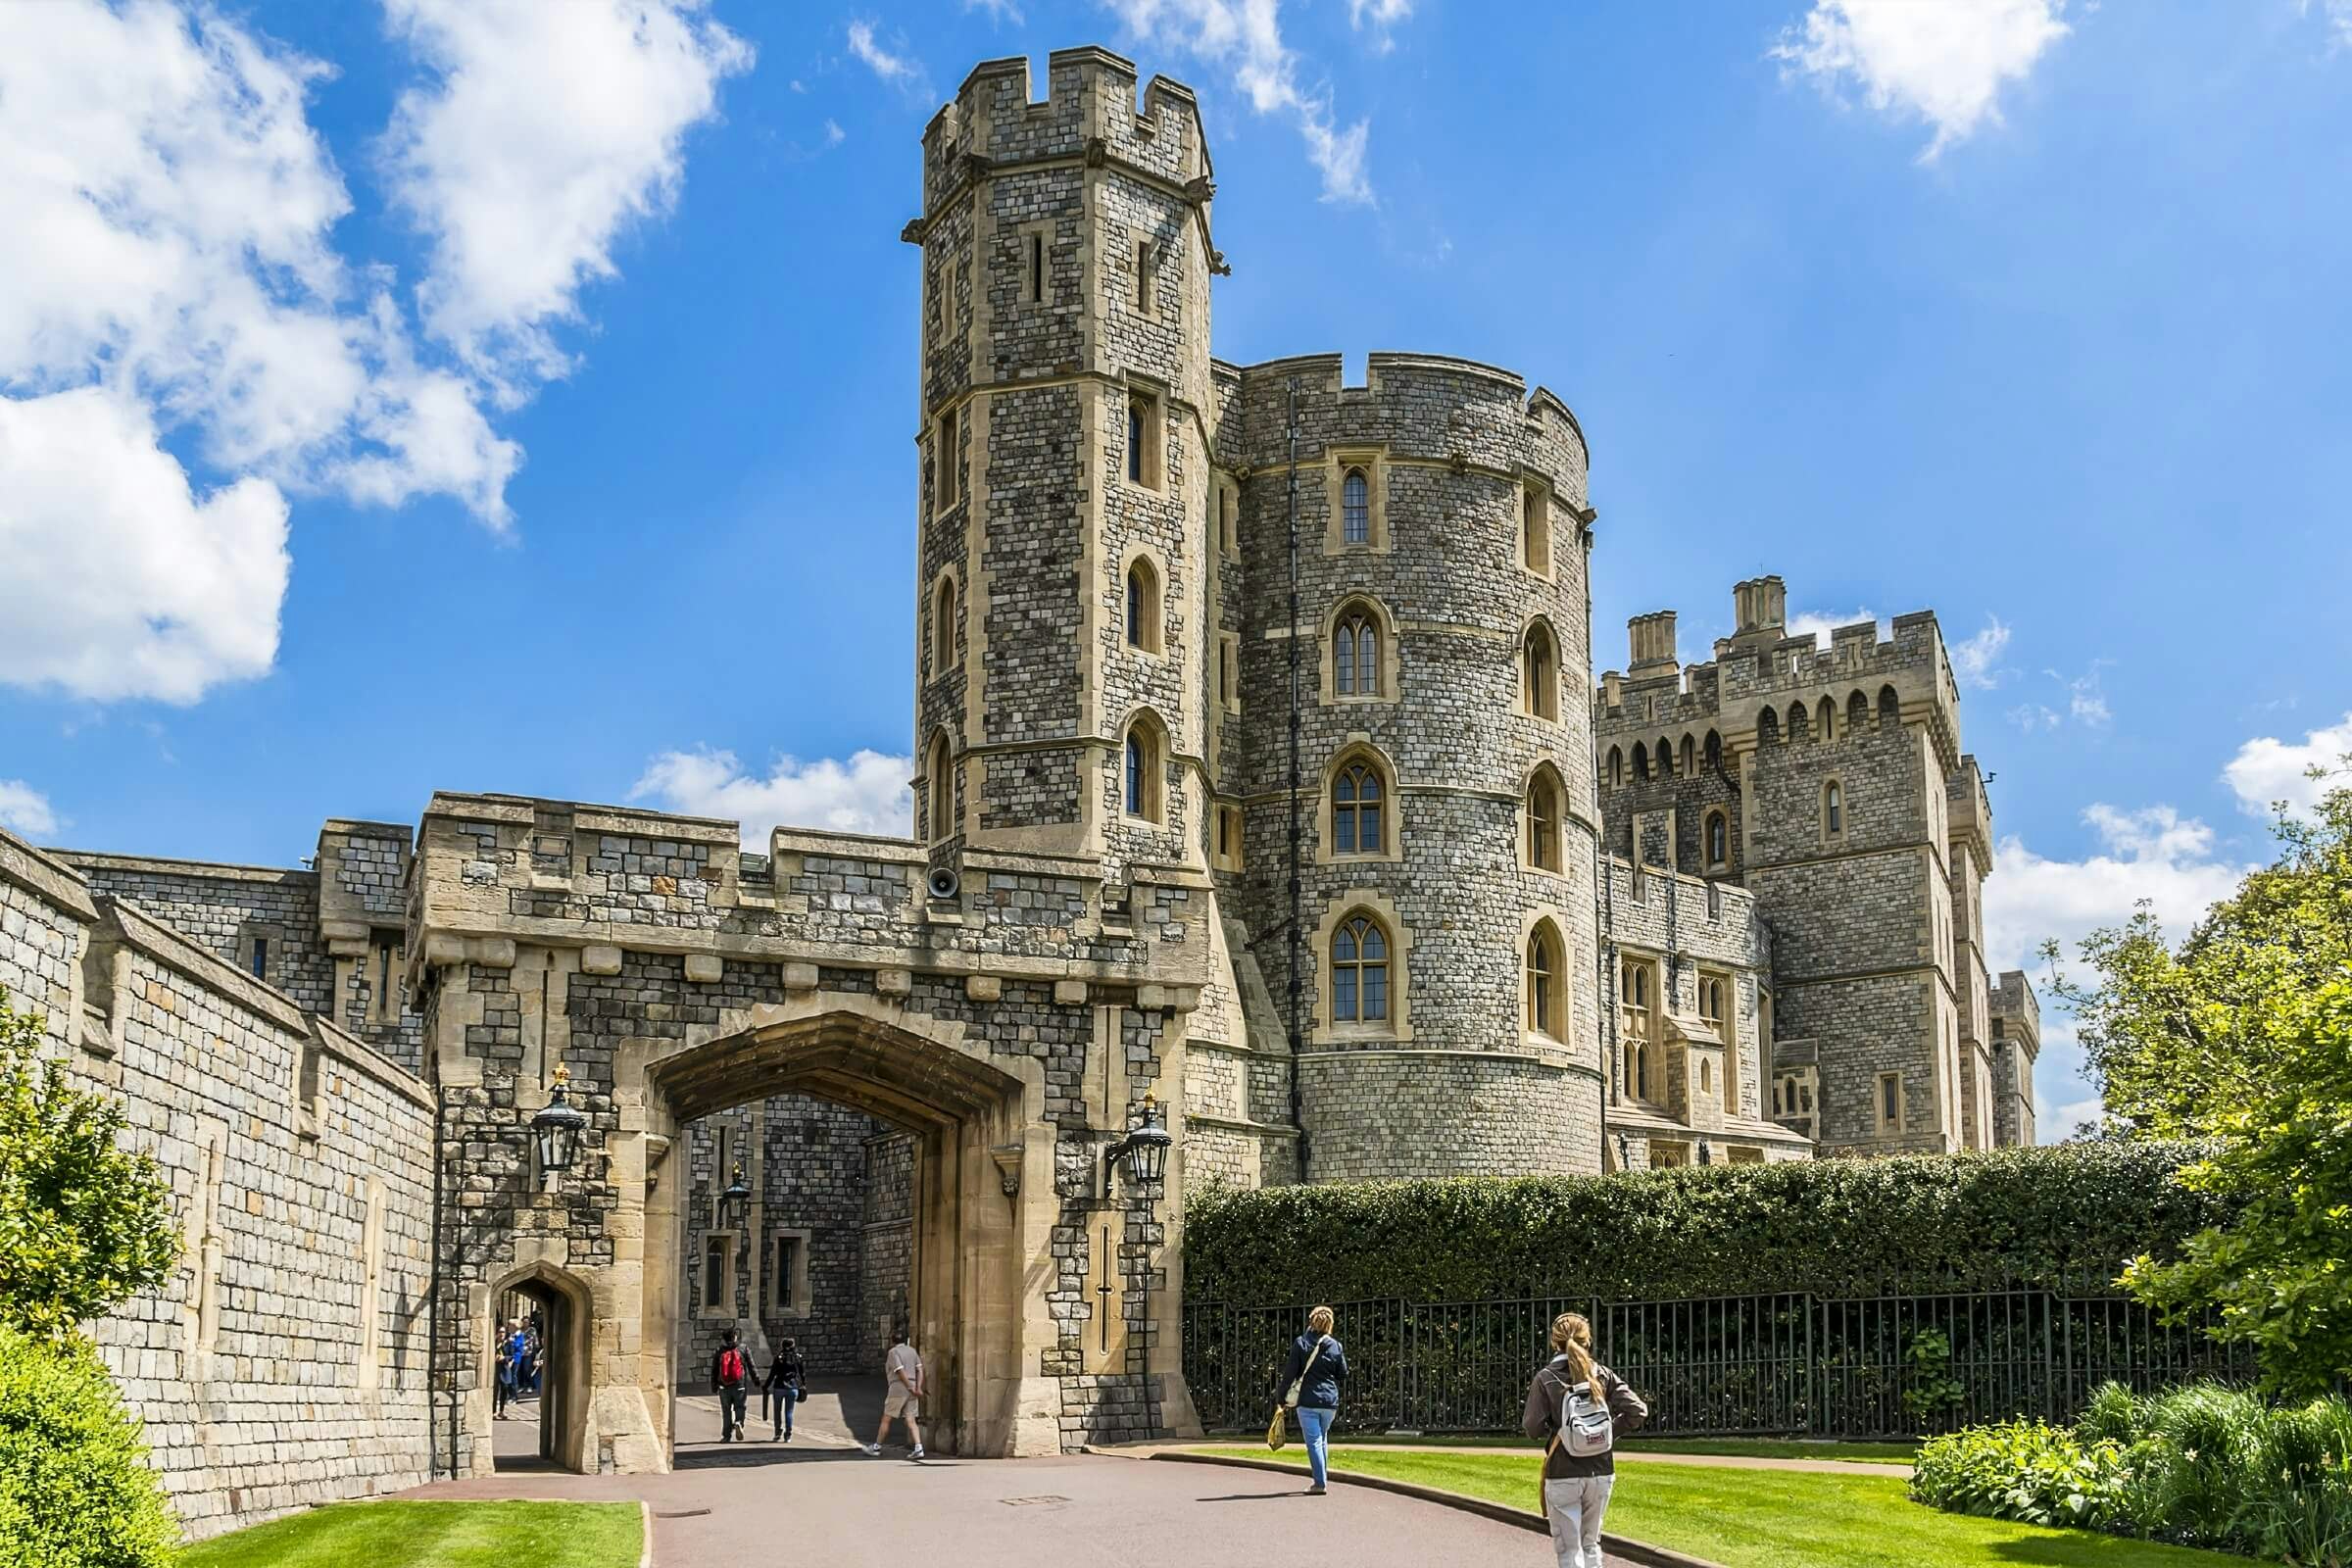 A view of Windsor Castle in England